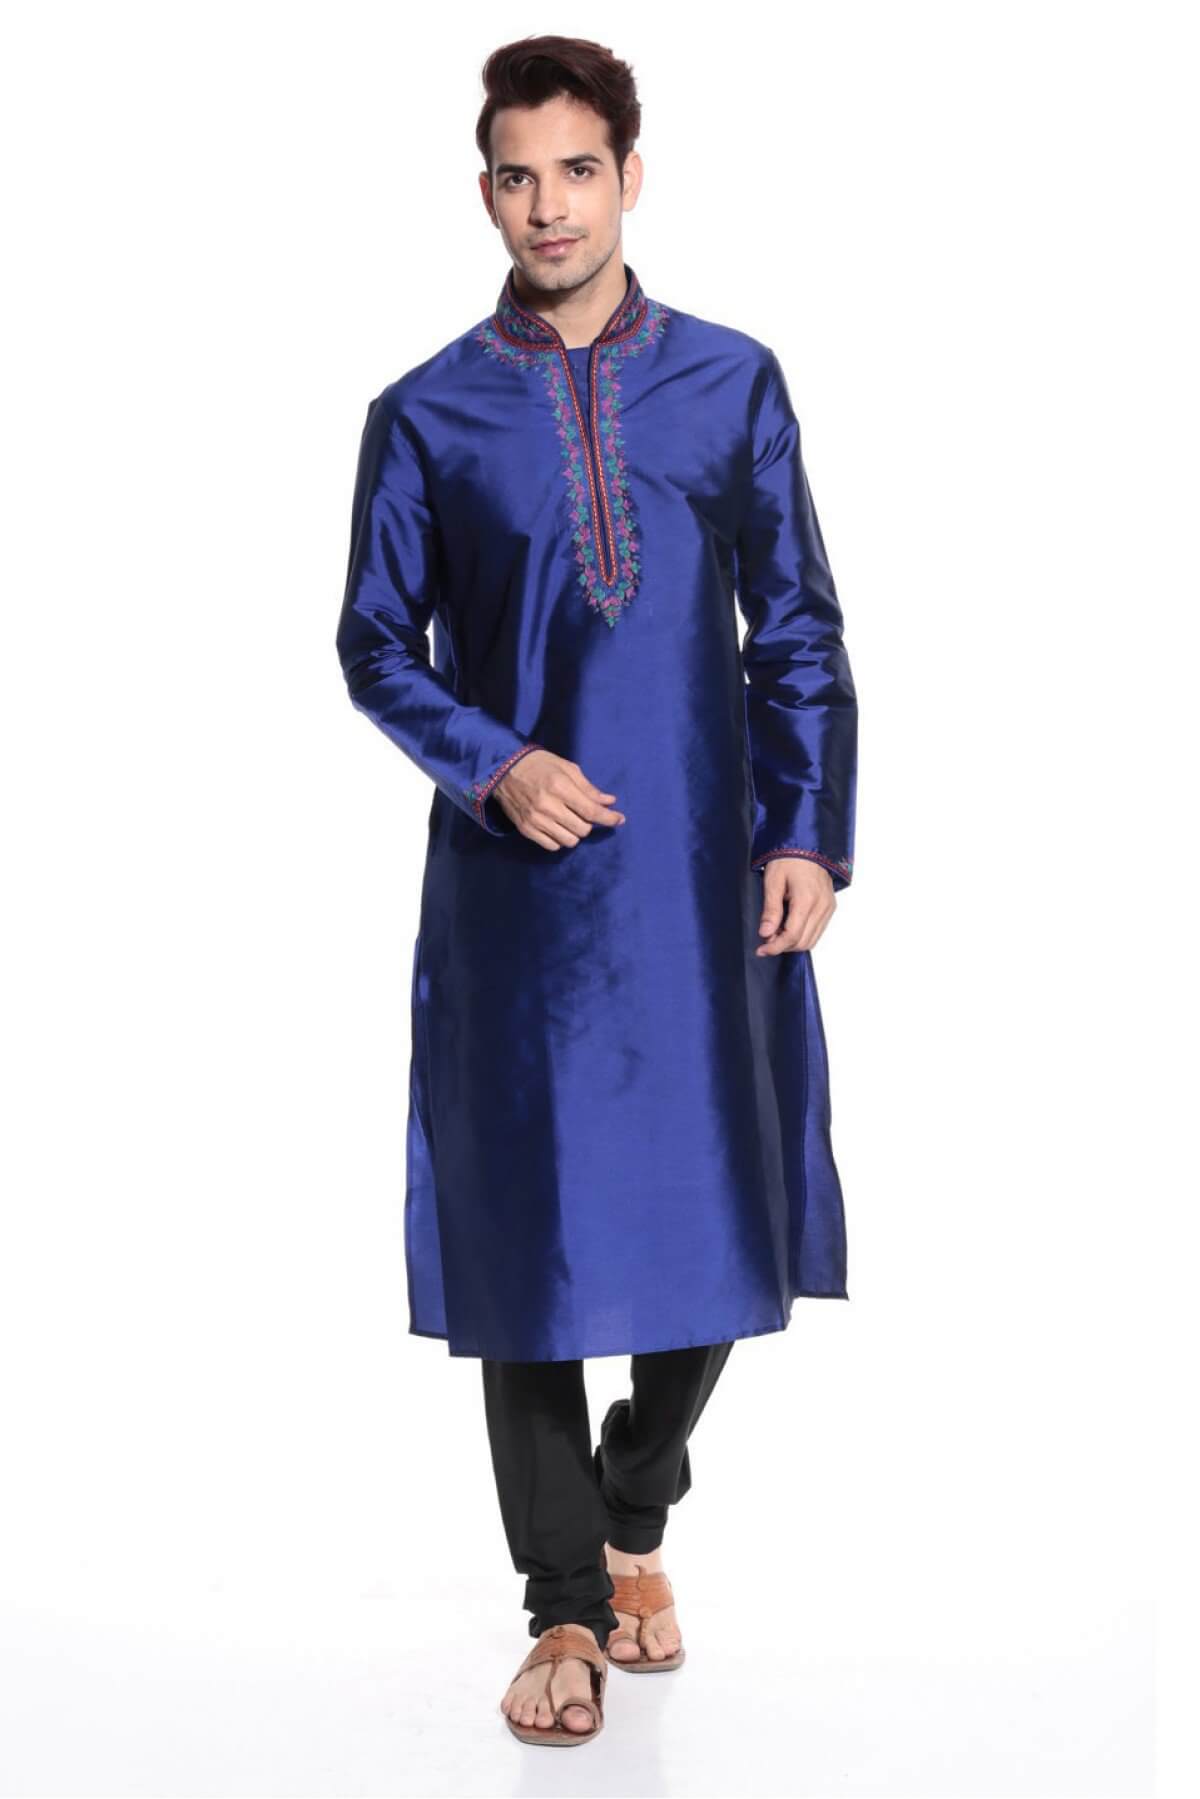 A man in a blue indian outfit
